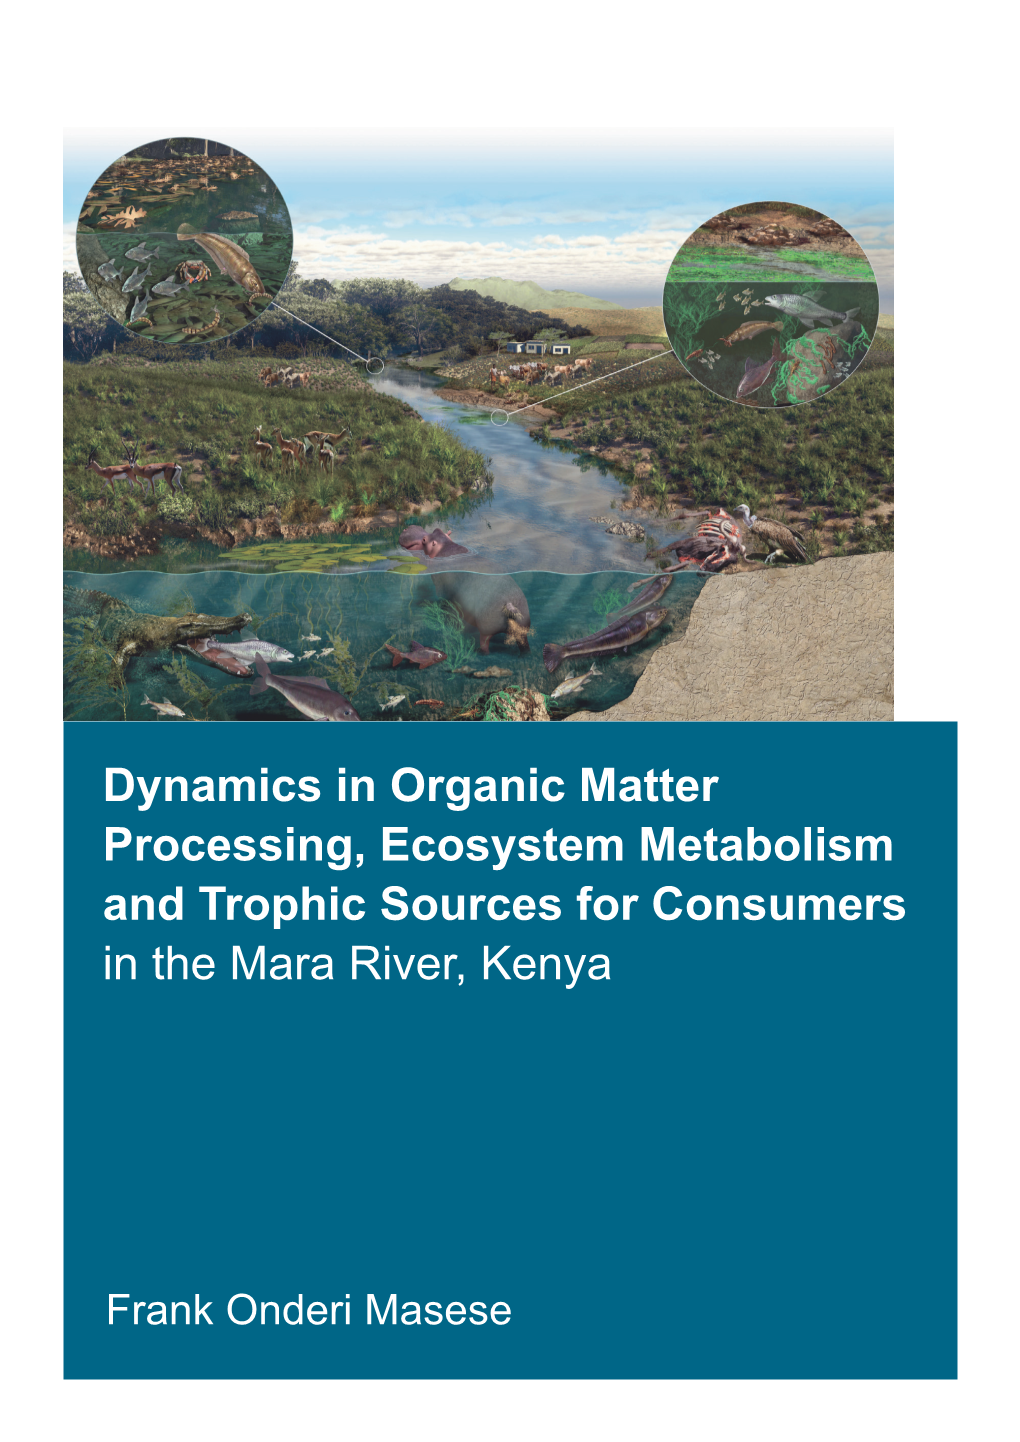 Dynamics in Organic Matter Processing, Ecosystem Metabolism and Trophic Sources for Consumers in the Mara River, Kenya